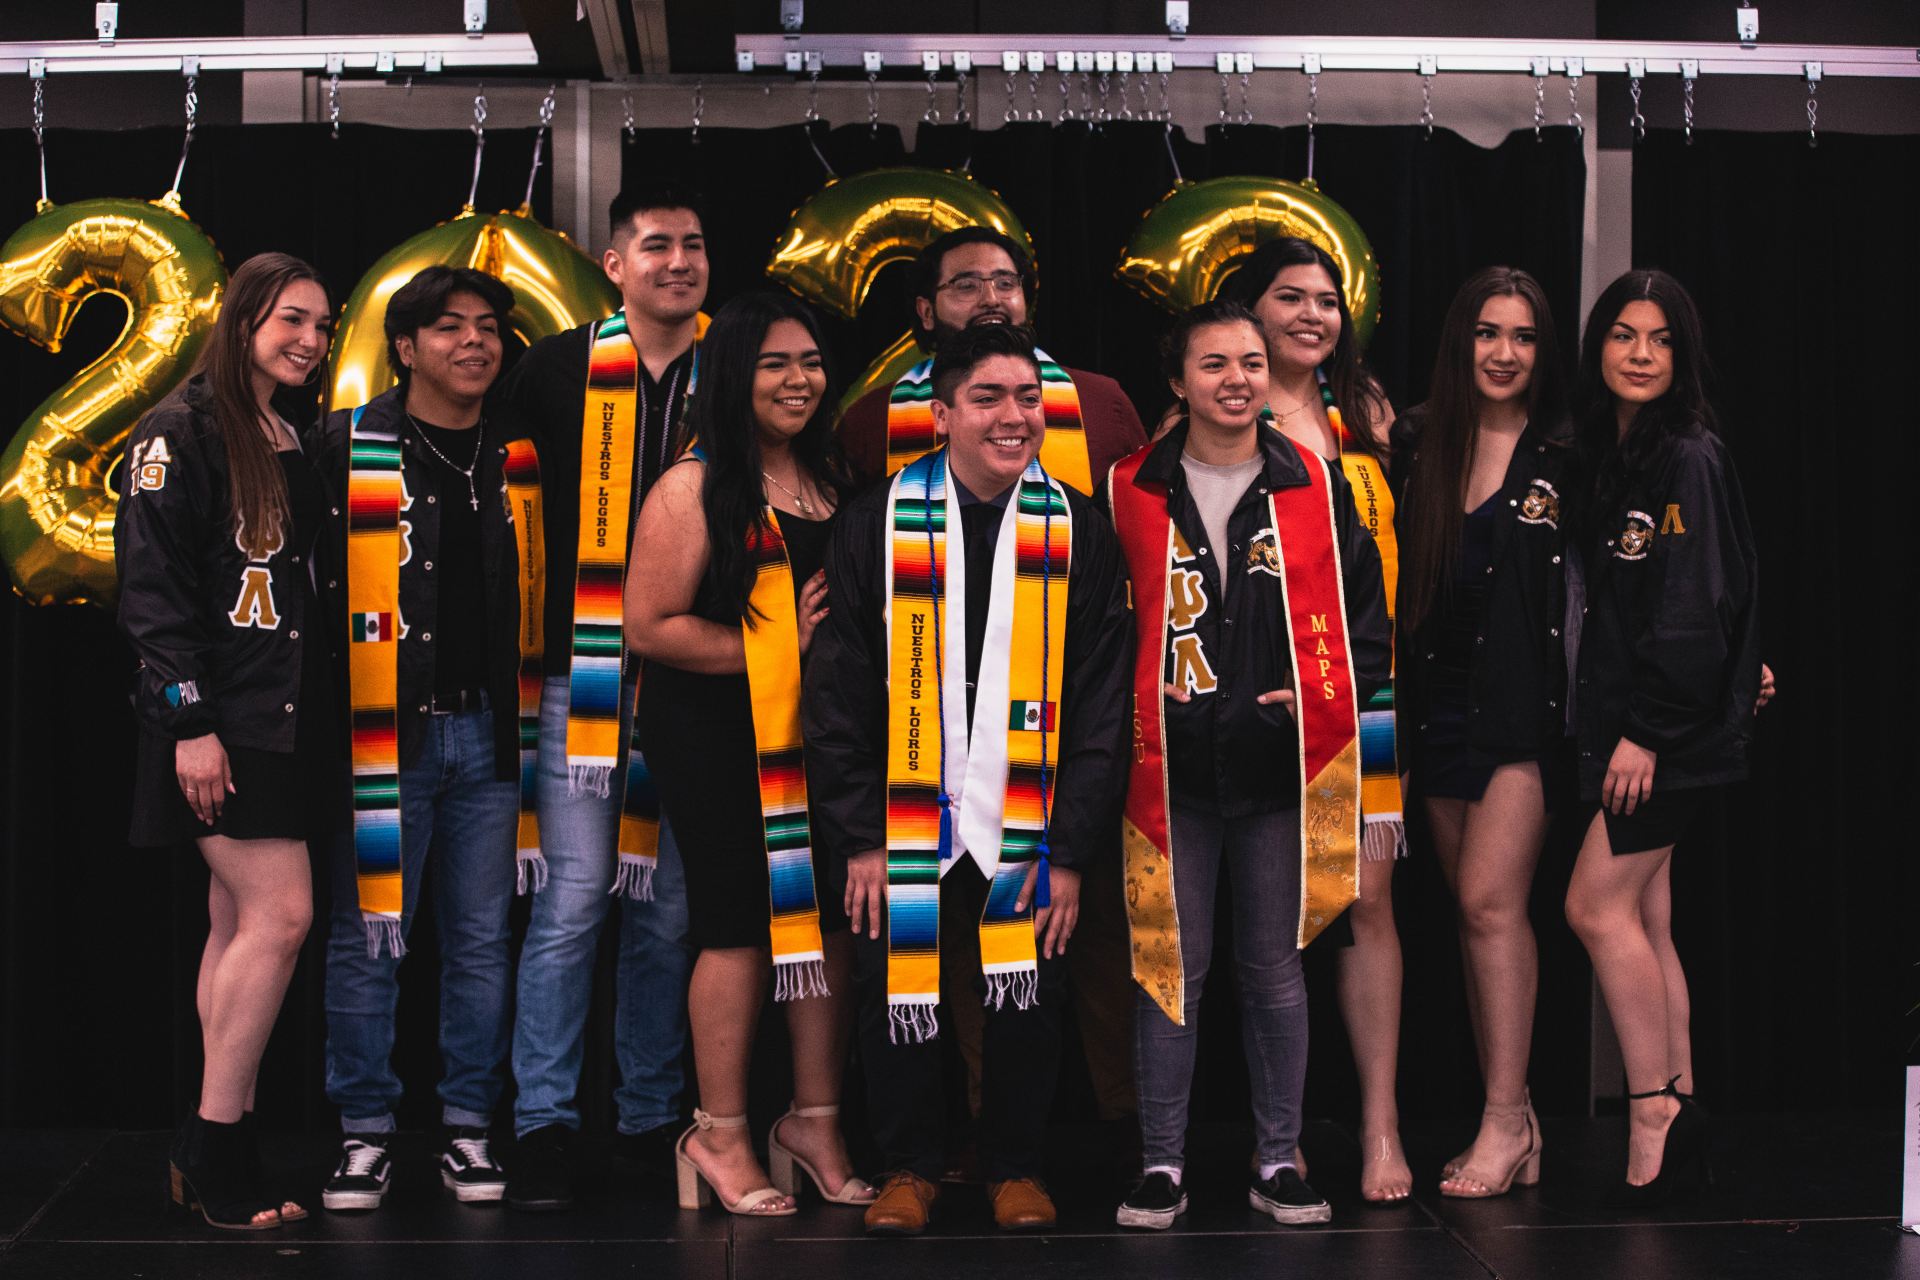 A group of graduates standing and posing together.